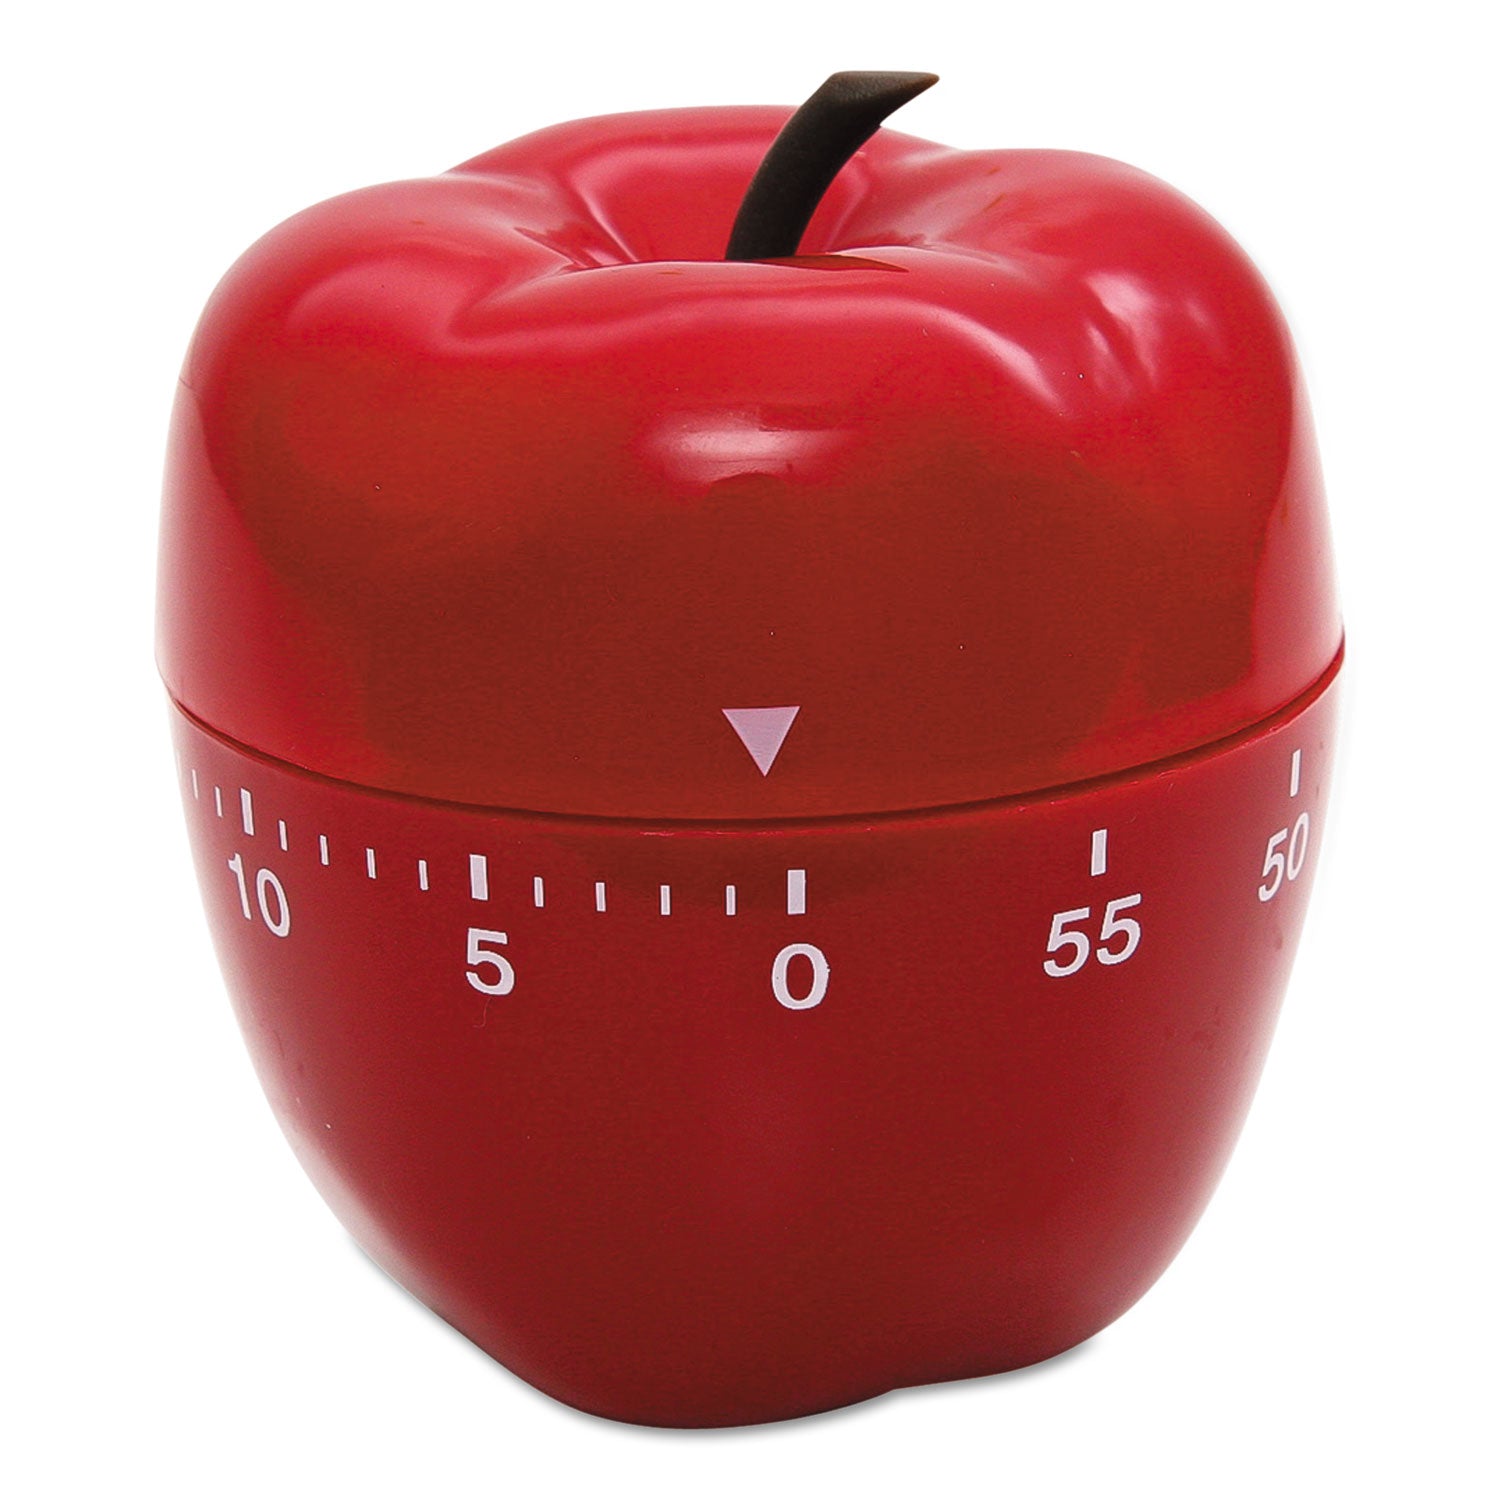 Shaped Timer, 4" Diameter x 4"h, Red Apple - 